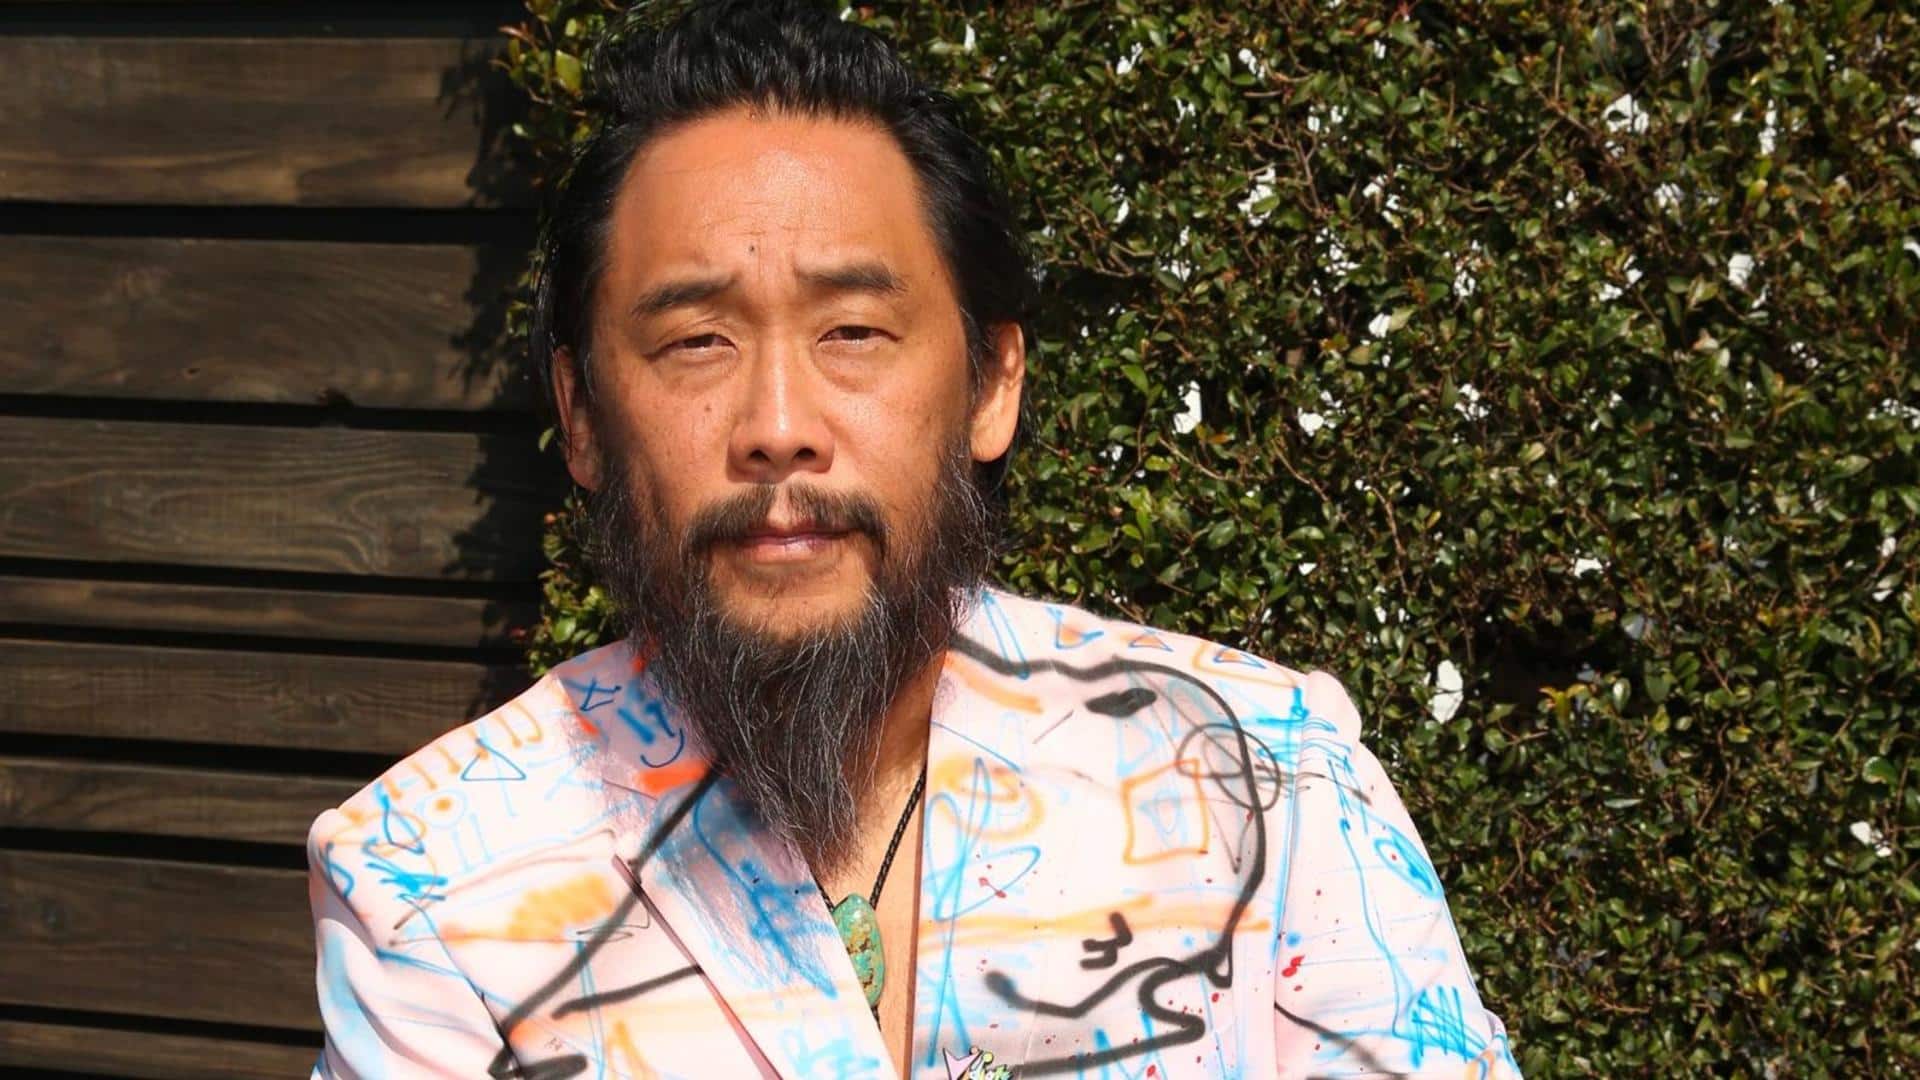 Who's David Choe, actor slammed for 'bragging' about 'rapey behavior'